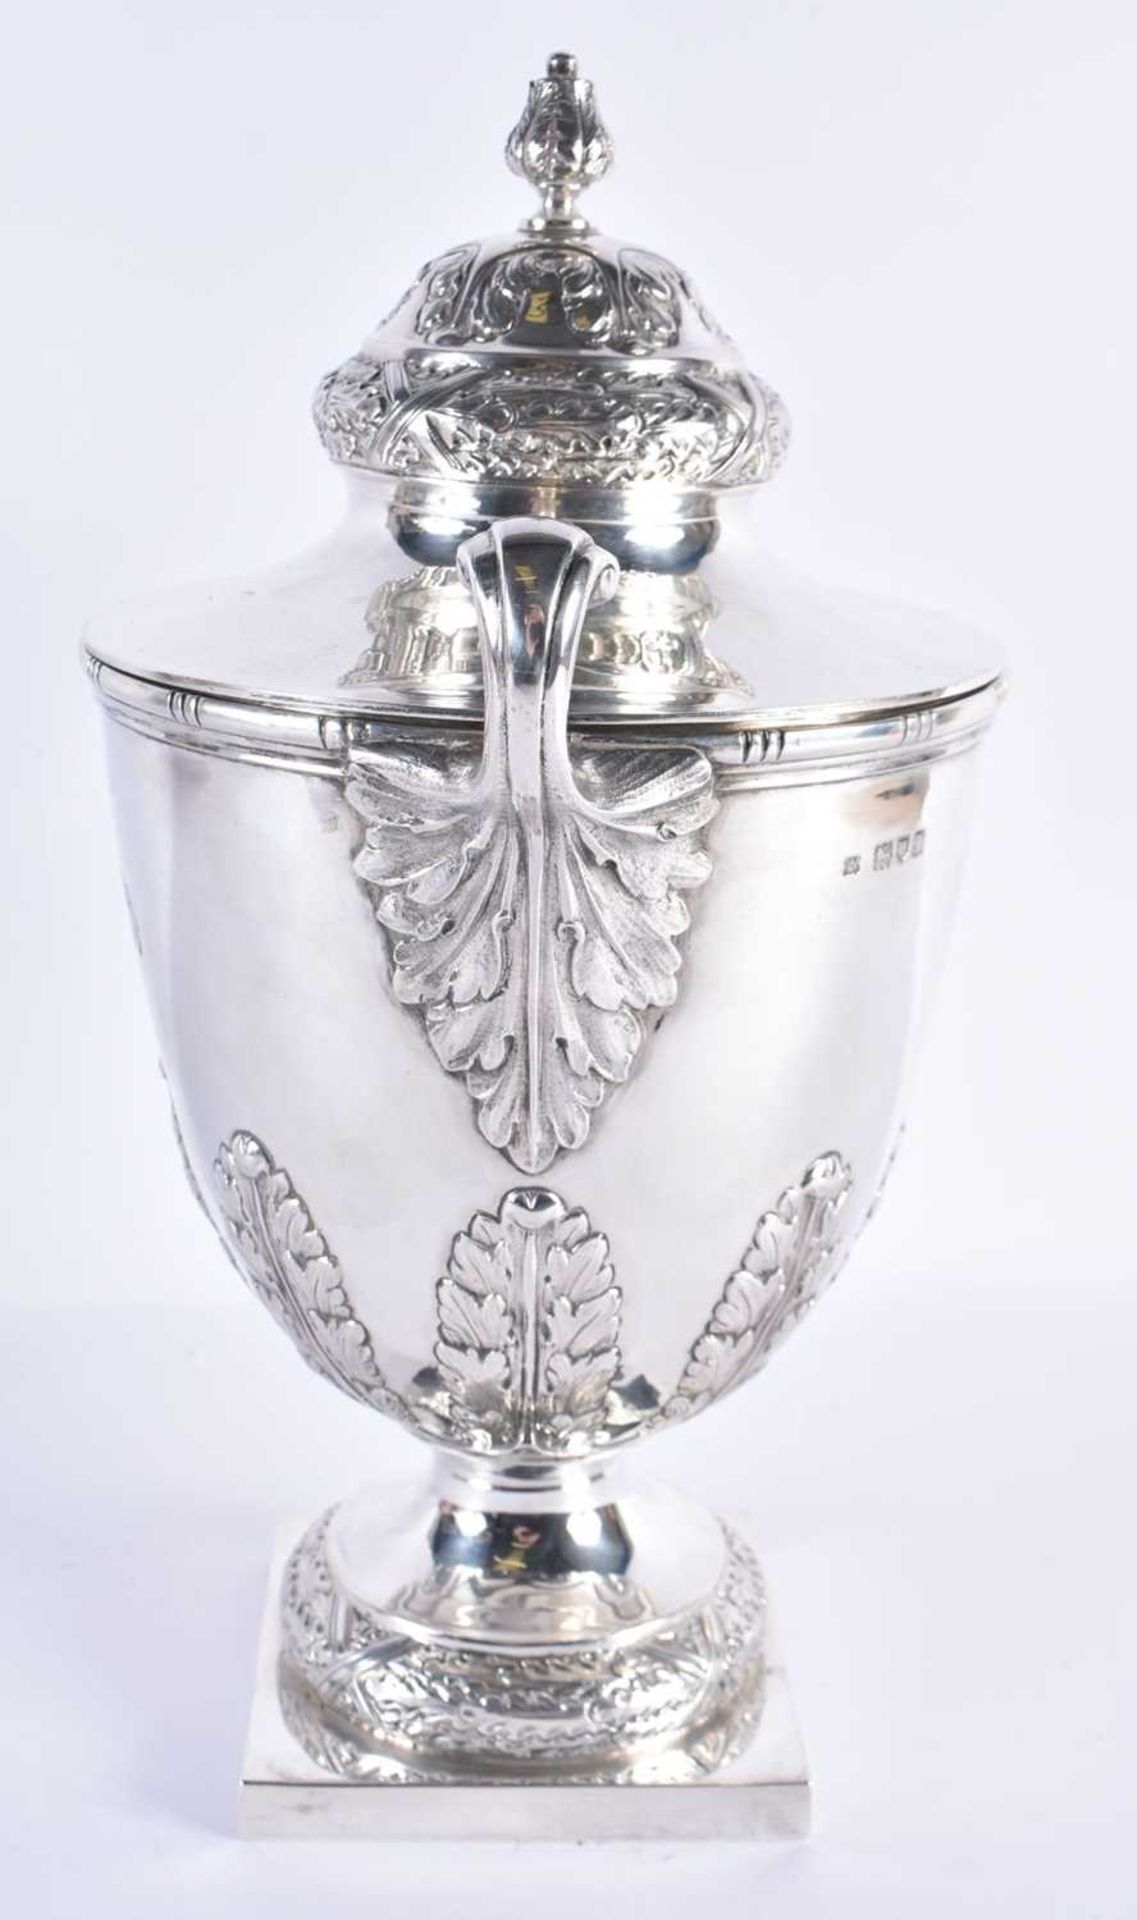 A FINE EARLY 20TH CENTURY ENGLISH SILVER TWIN HANDLED ARMORIAL VASE AND COVER by D & J Welby Ltd. - Image 3 of 7